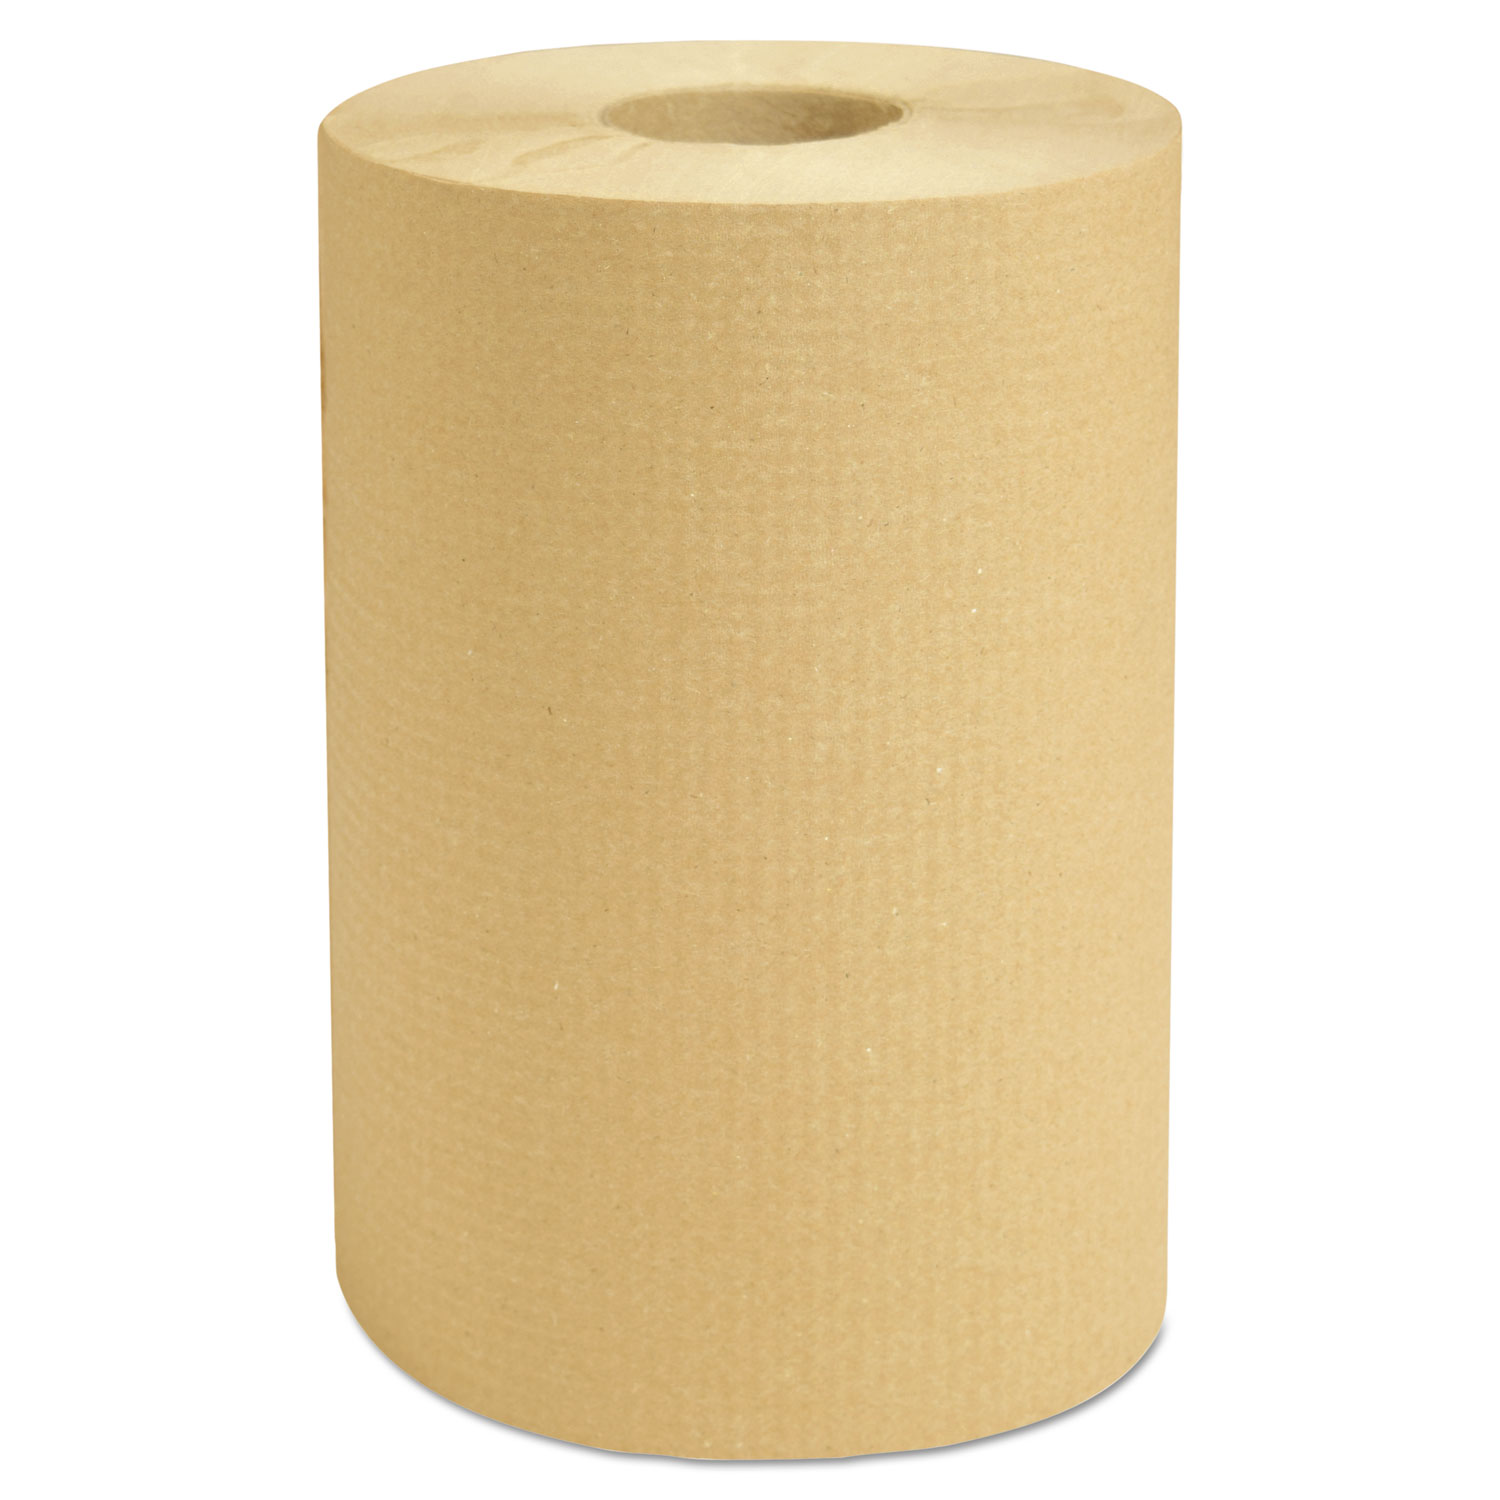 North River Hardwound Roll Towels, Natural, 7 7/8 in x 350 ft, 12/Carton